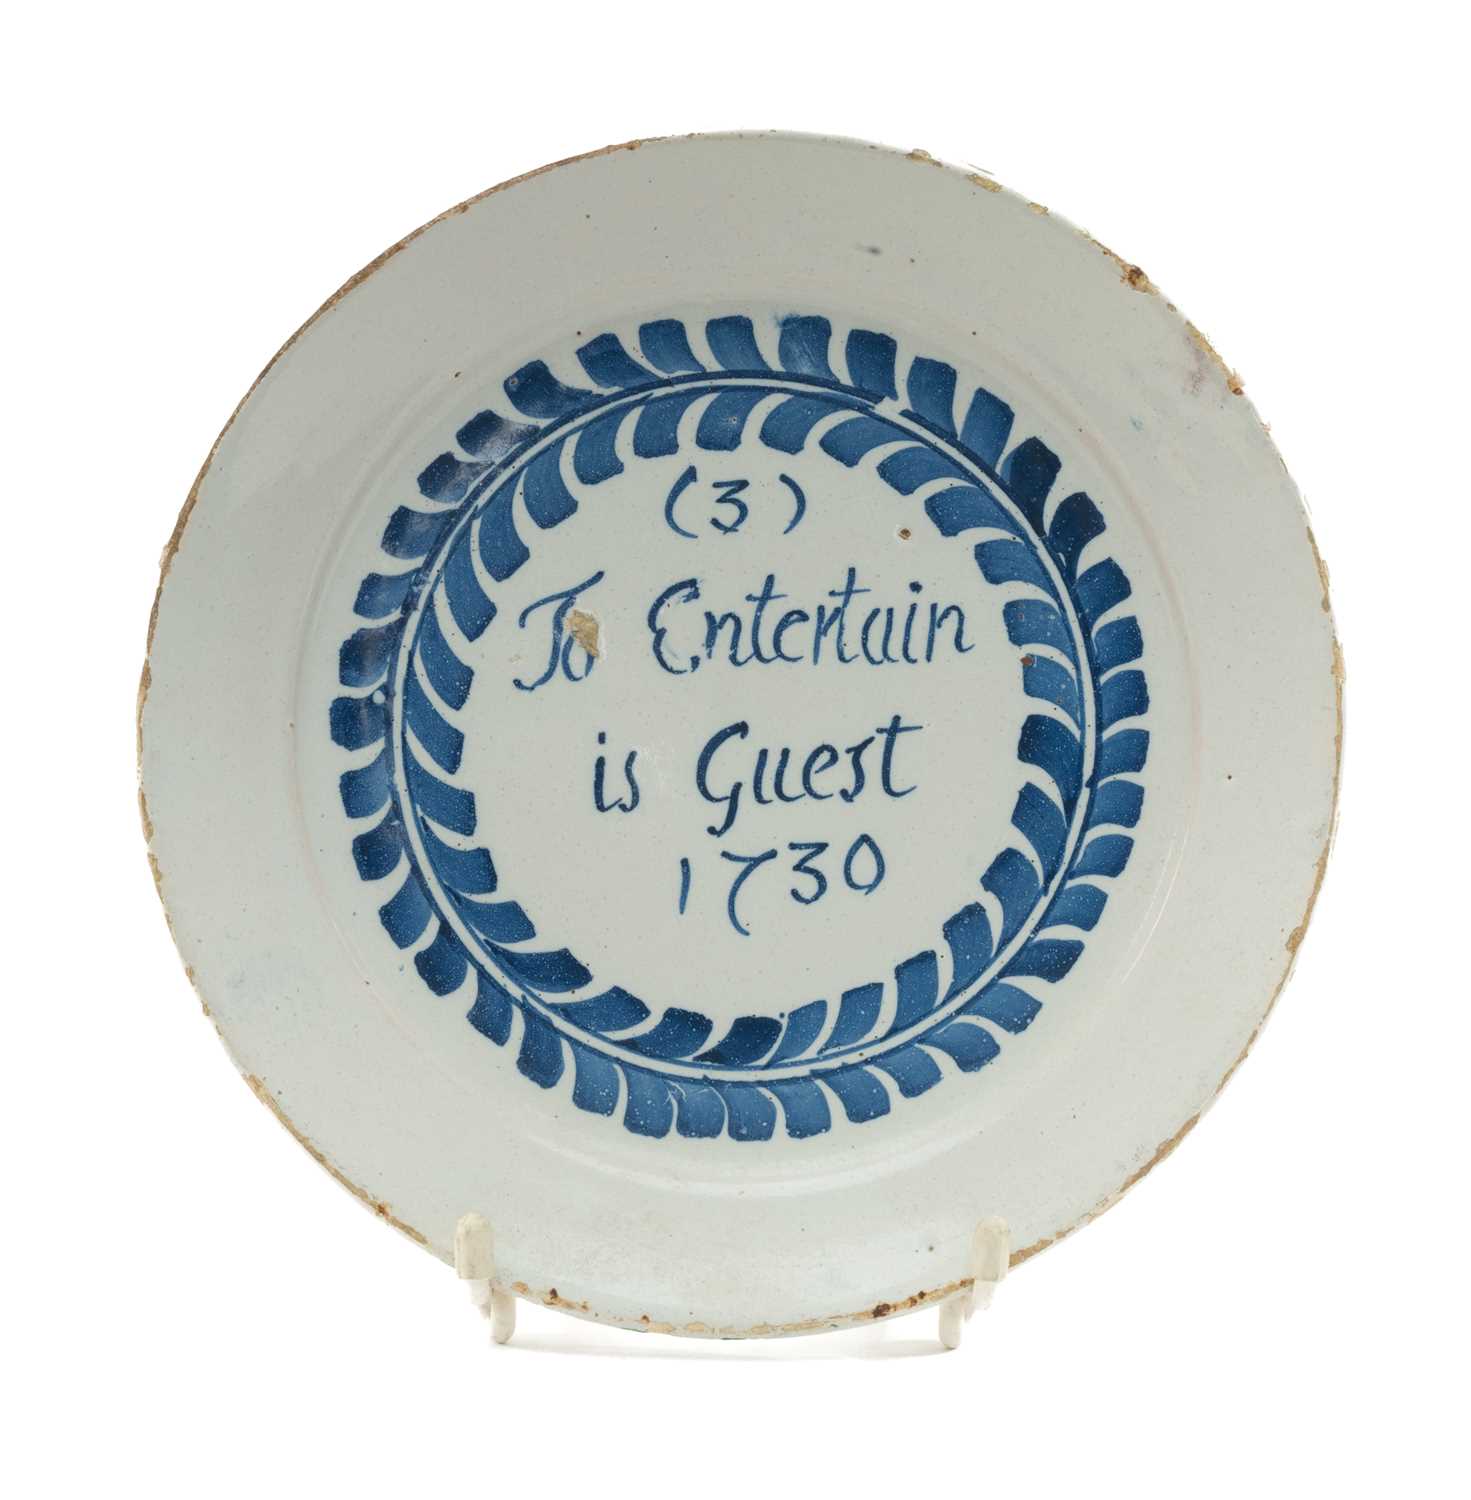 GEORGE II ENGLISH DELFT 'MERRYMAN' PLATE, dated 1730, probably London, inscribed in the centre 'To